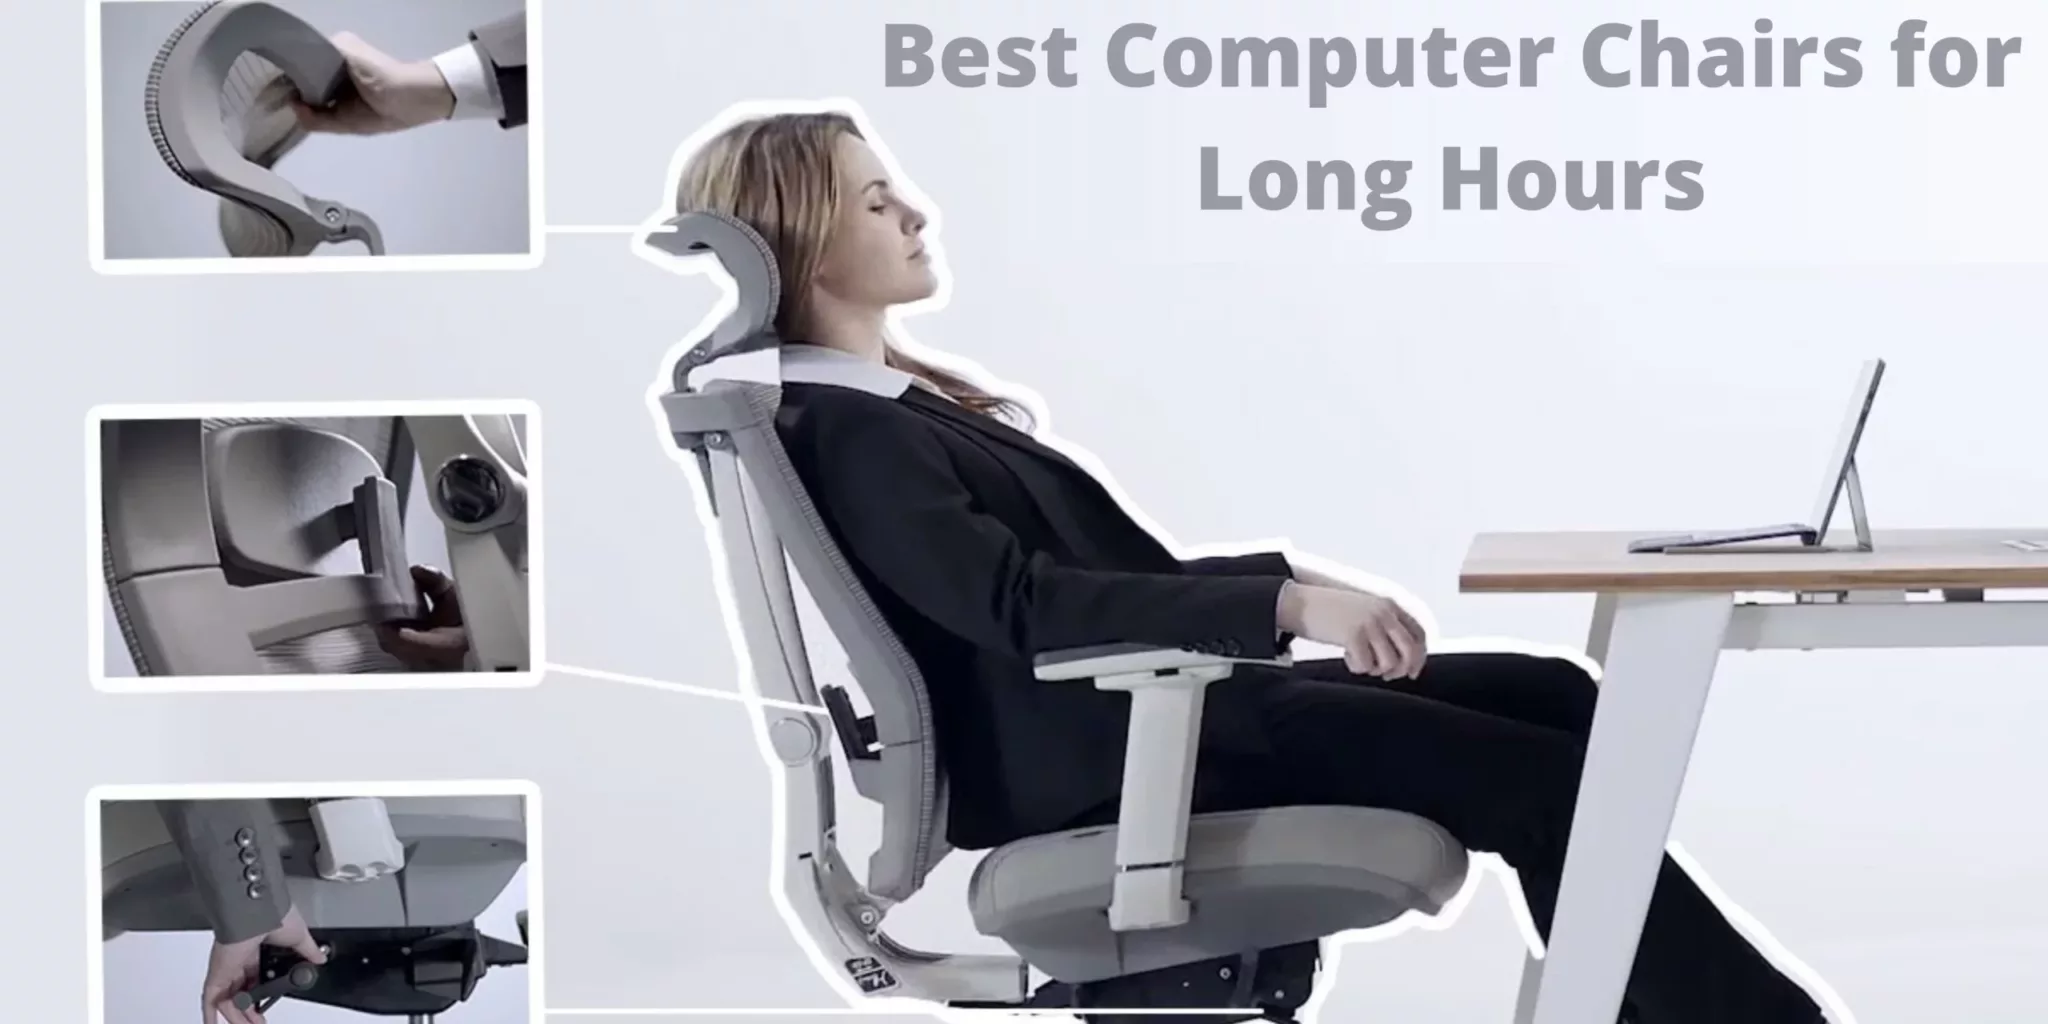 Best Computer Chair for Long Hours